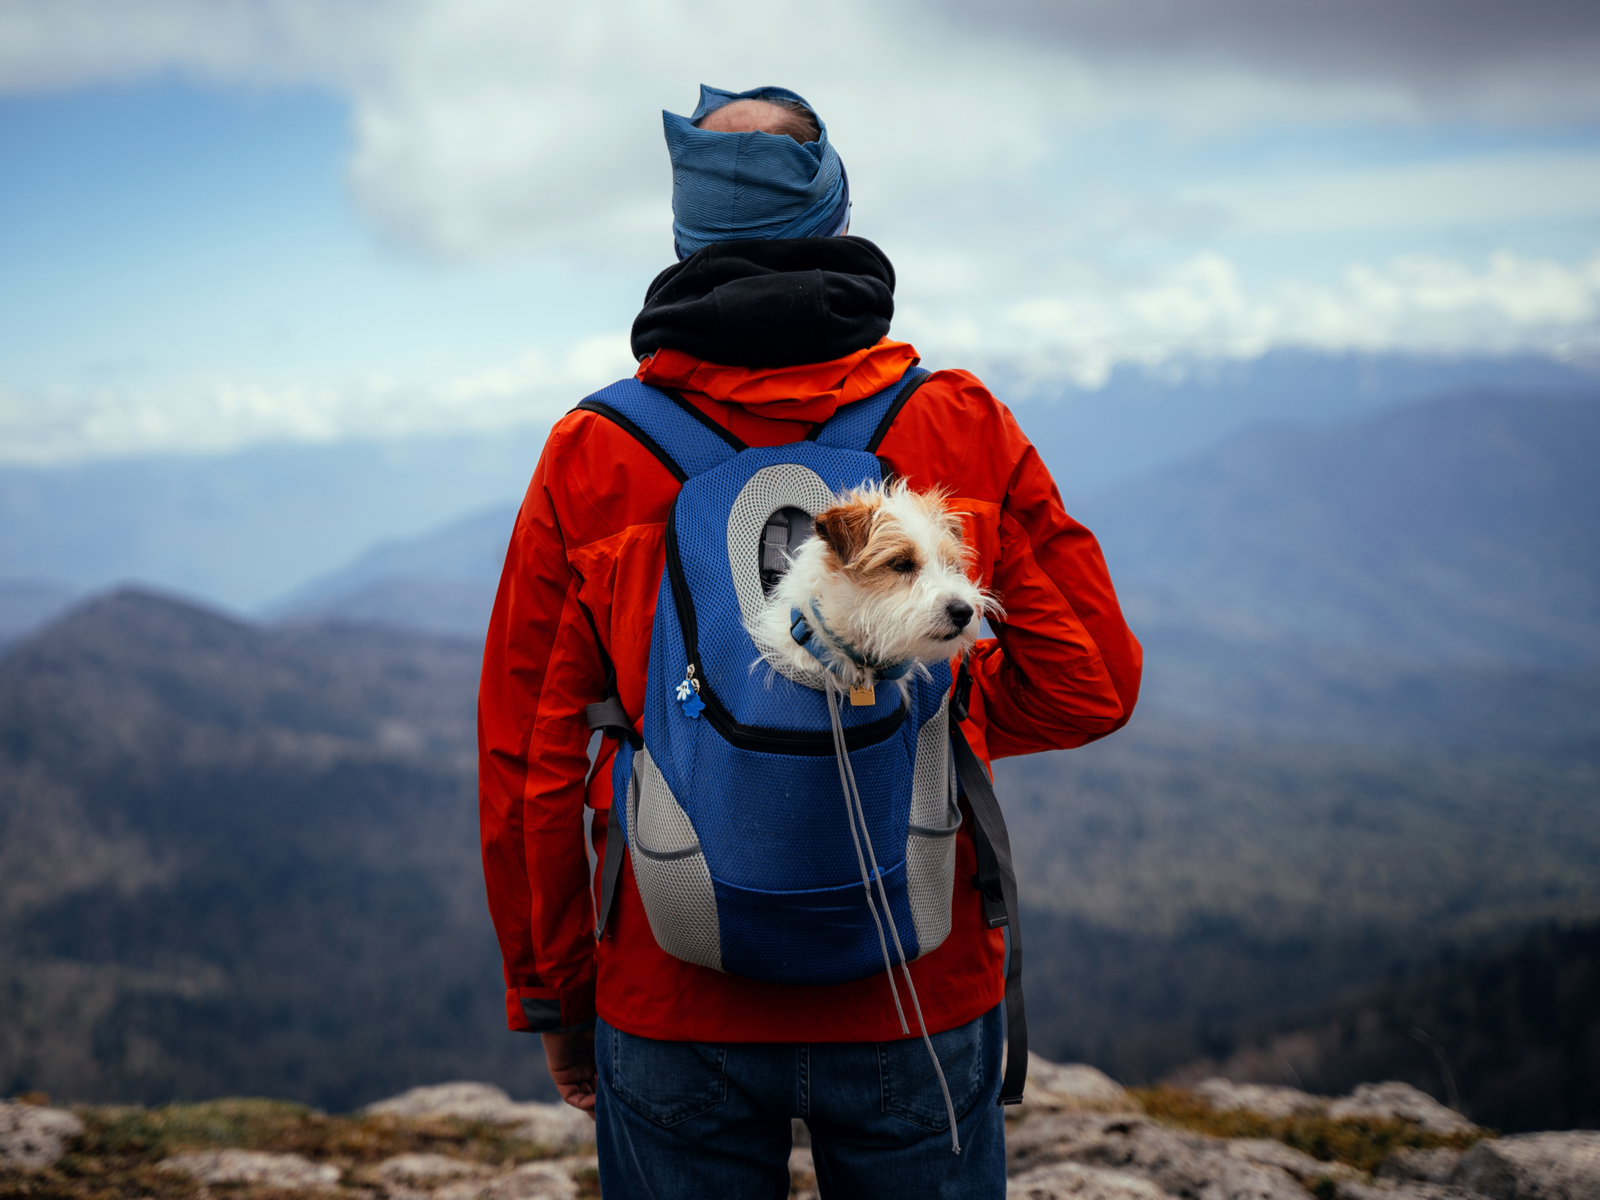 Small brown and white dog in one of the best dog hiking backpacks on the back of a guy in a red coat